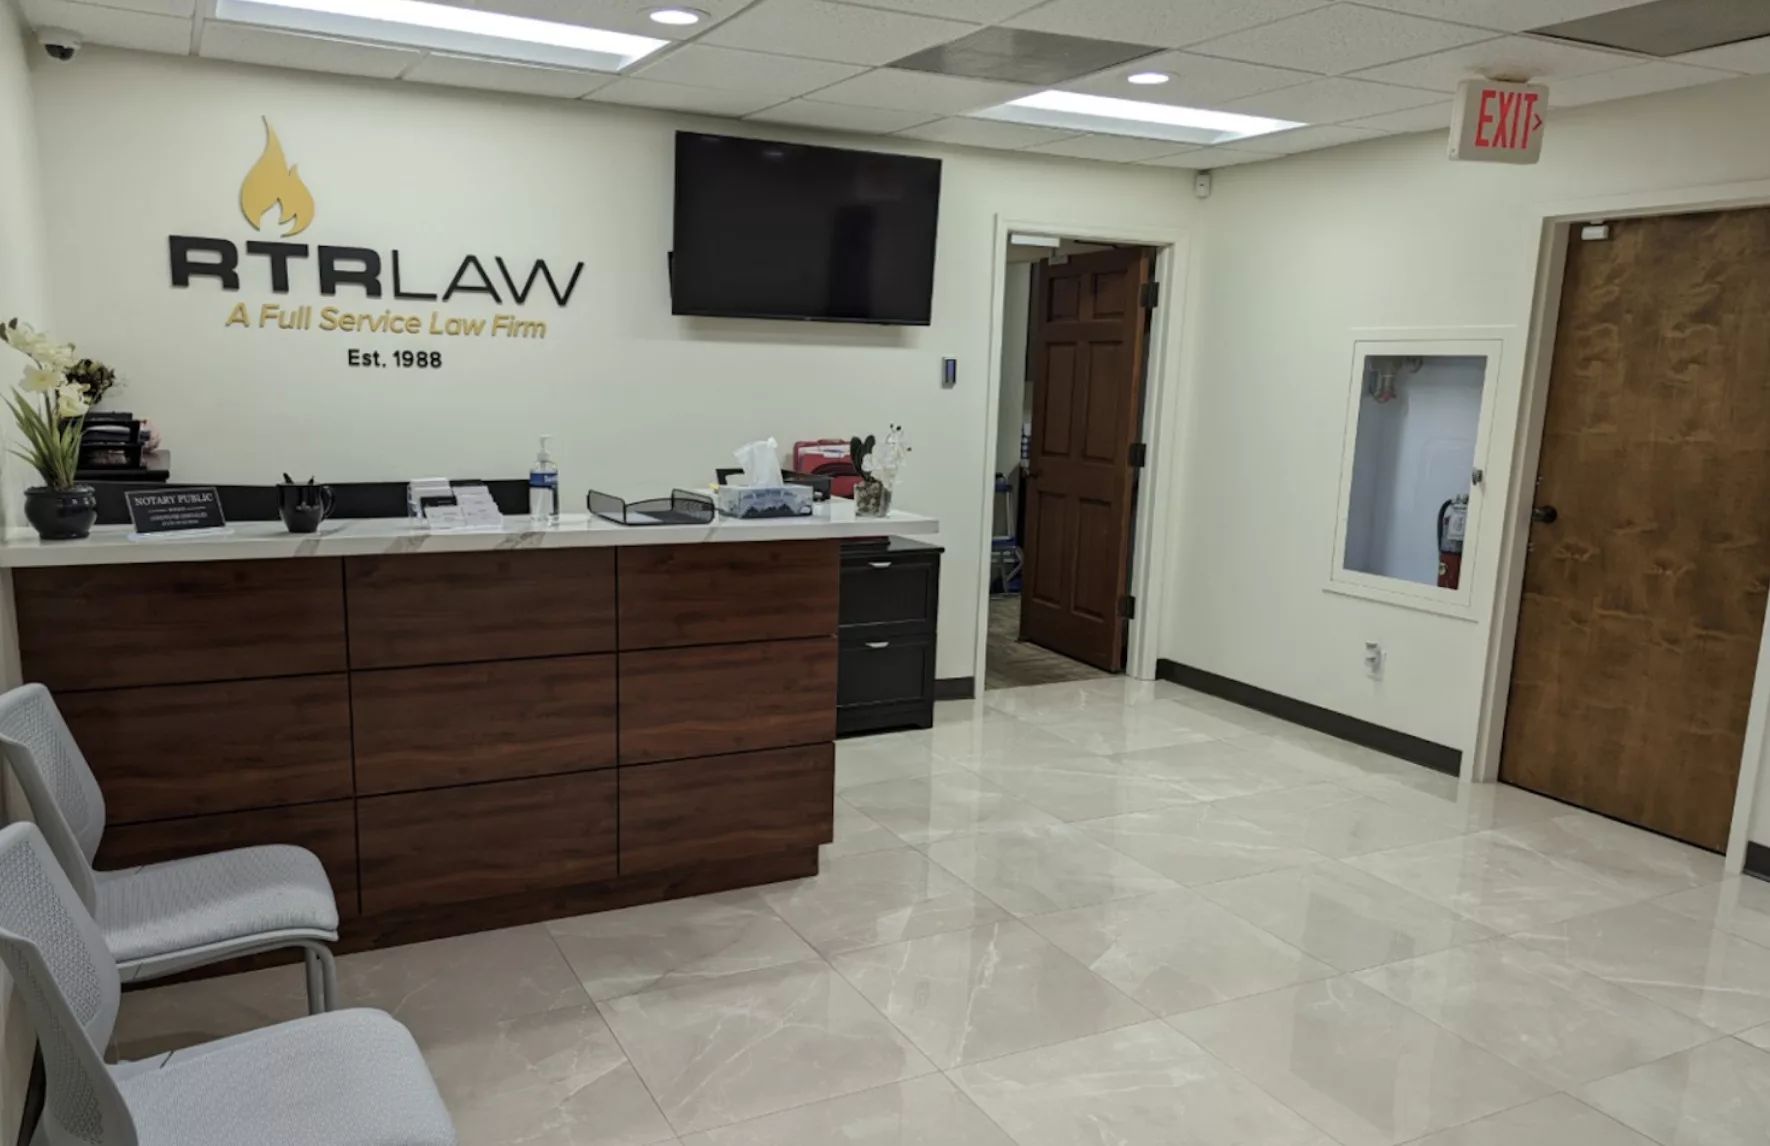 Tampa Full Service Law Firm